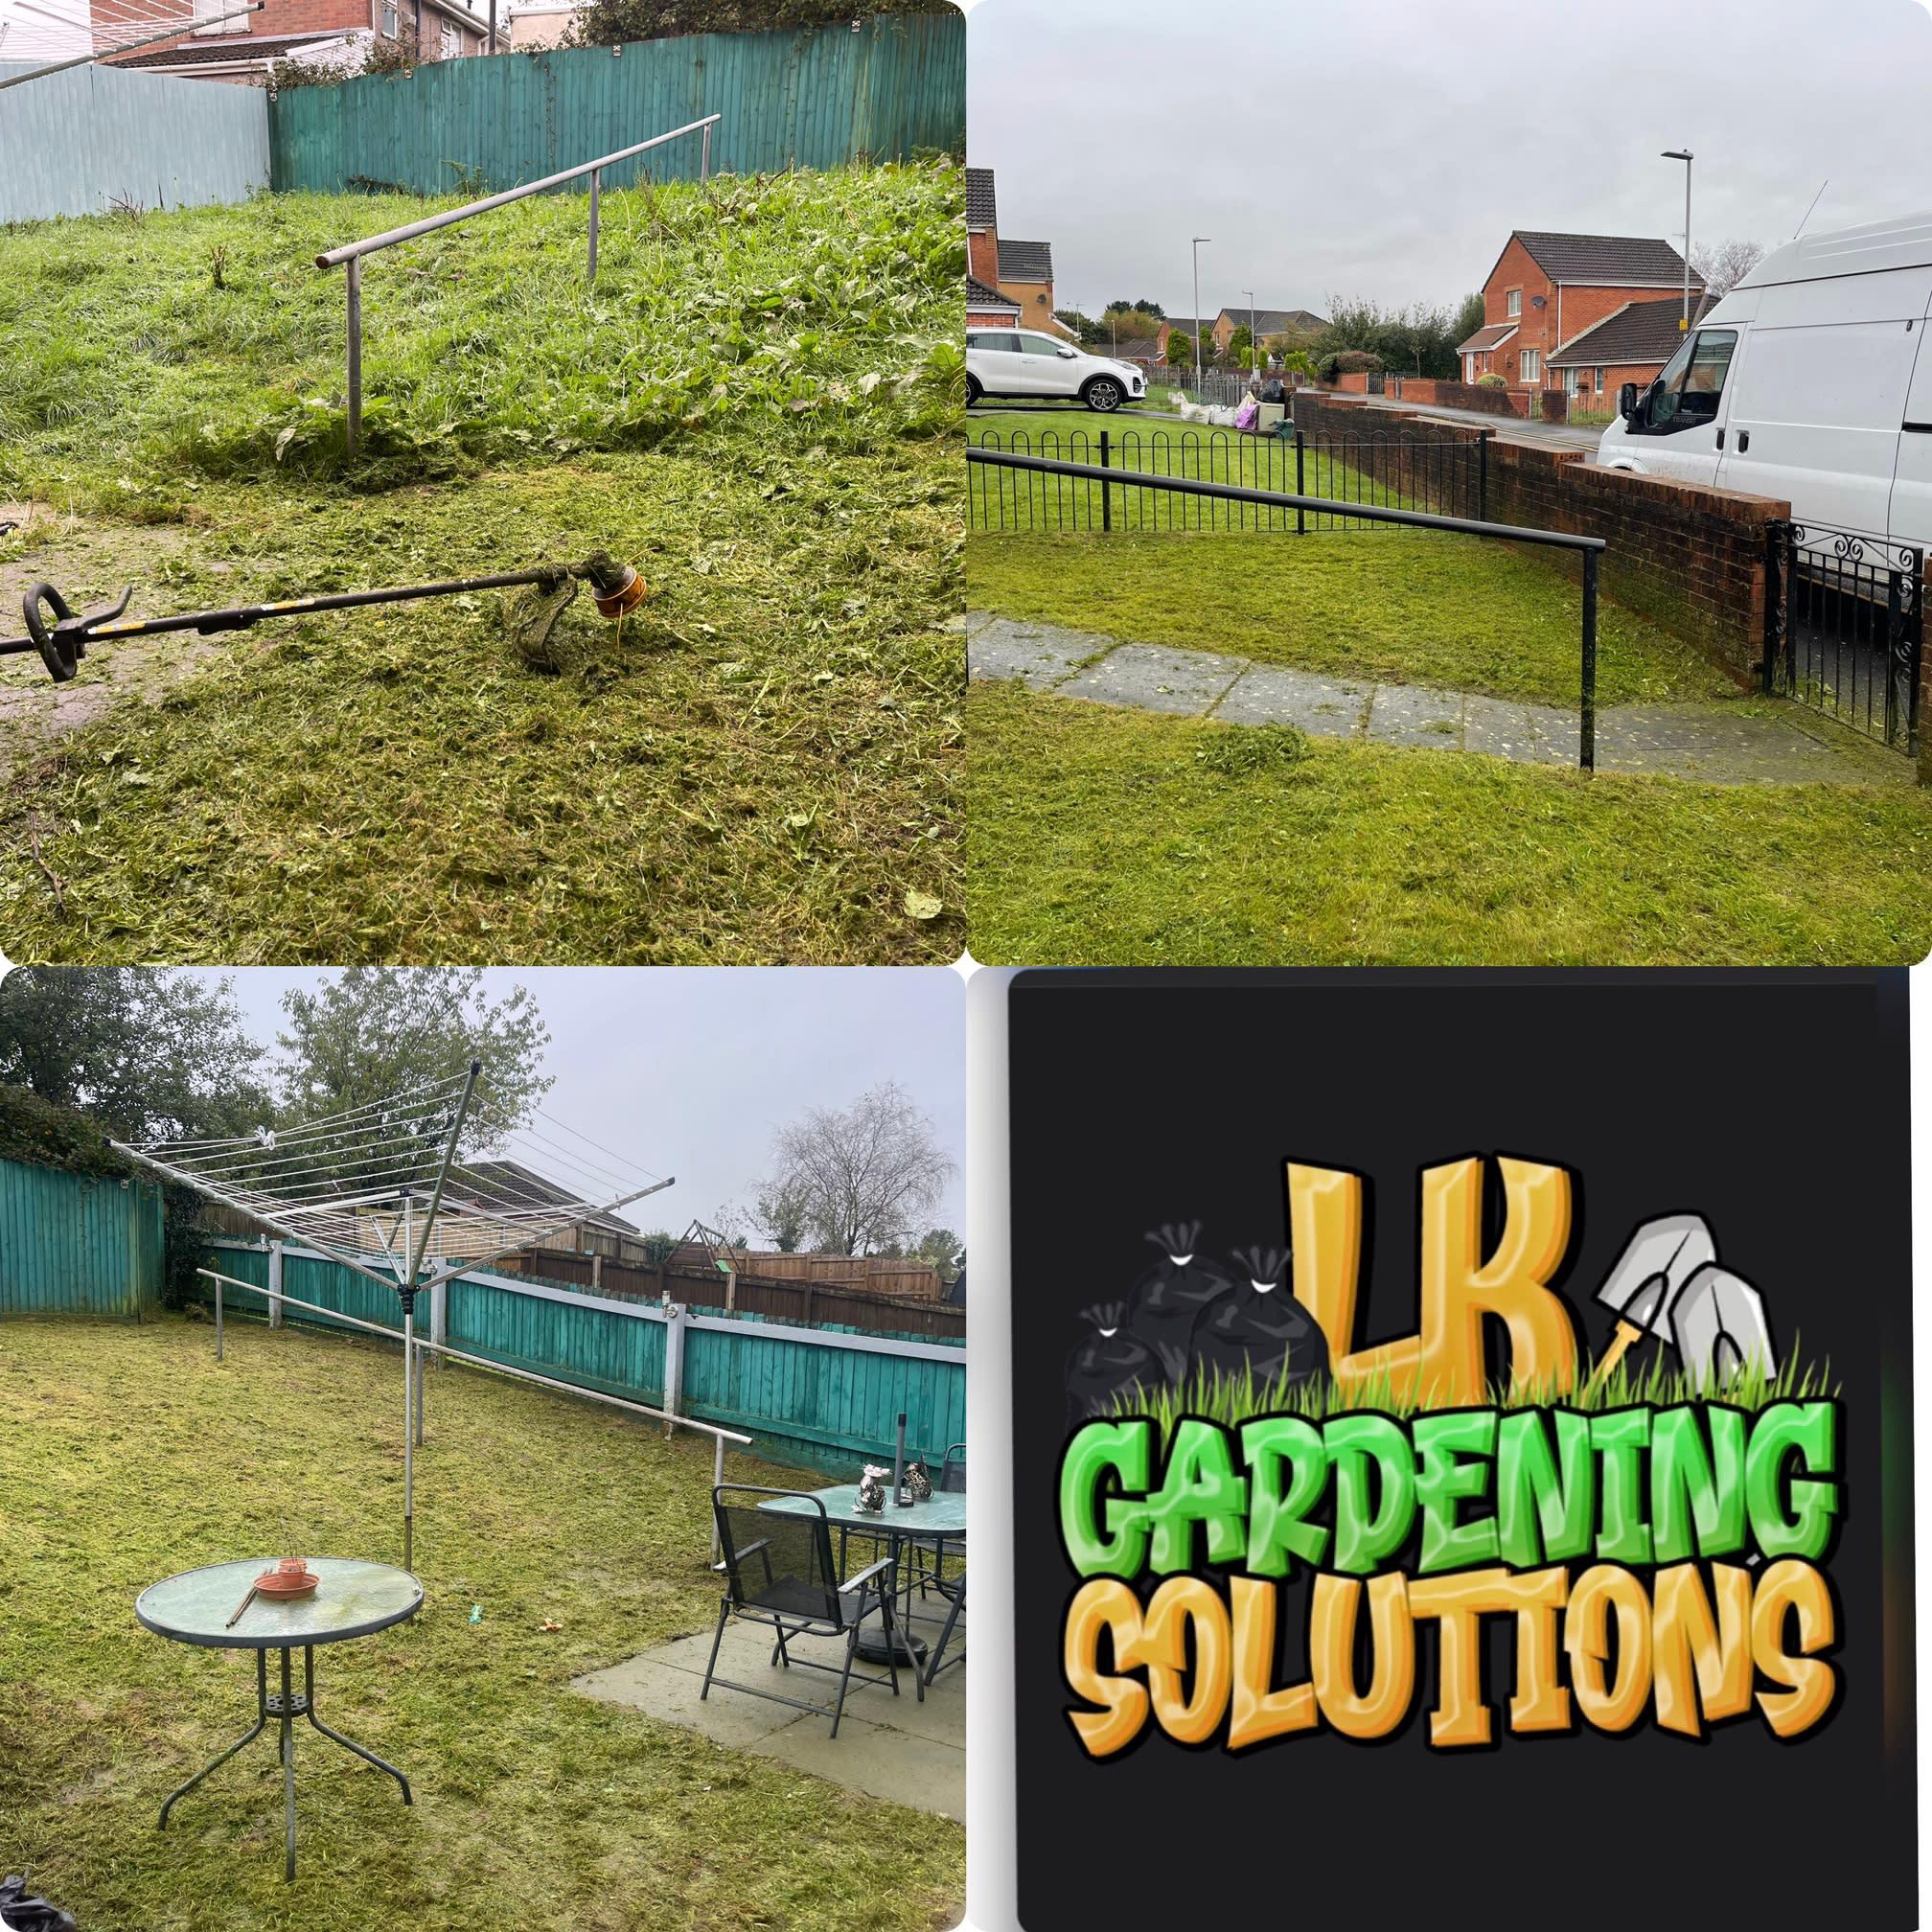 Images LK Gardening Solutions and Waste Disposal